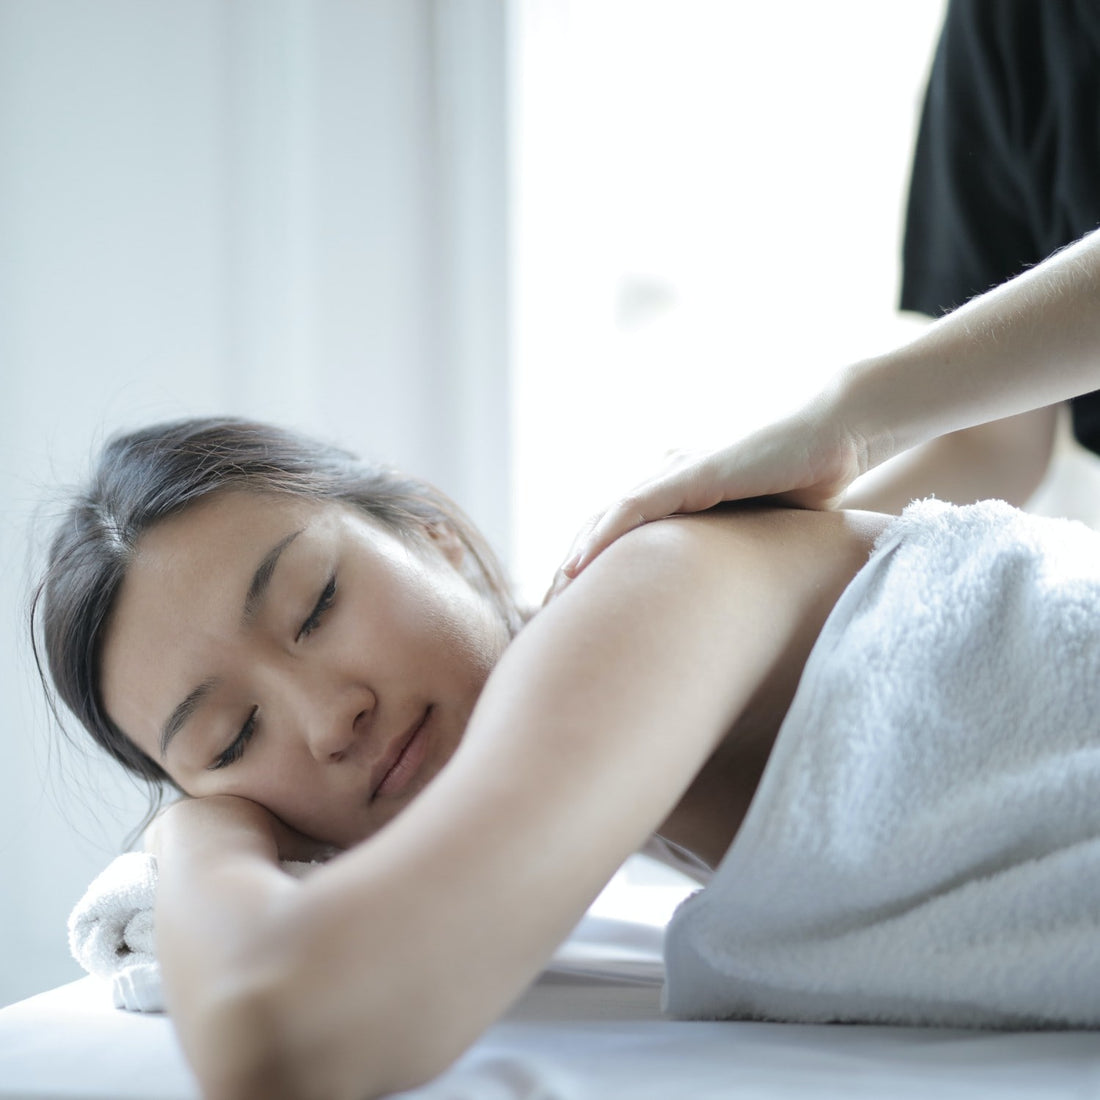 Why Does Massaging Sore Muscles Feel Good?